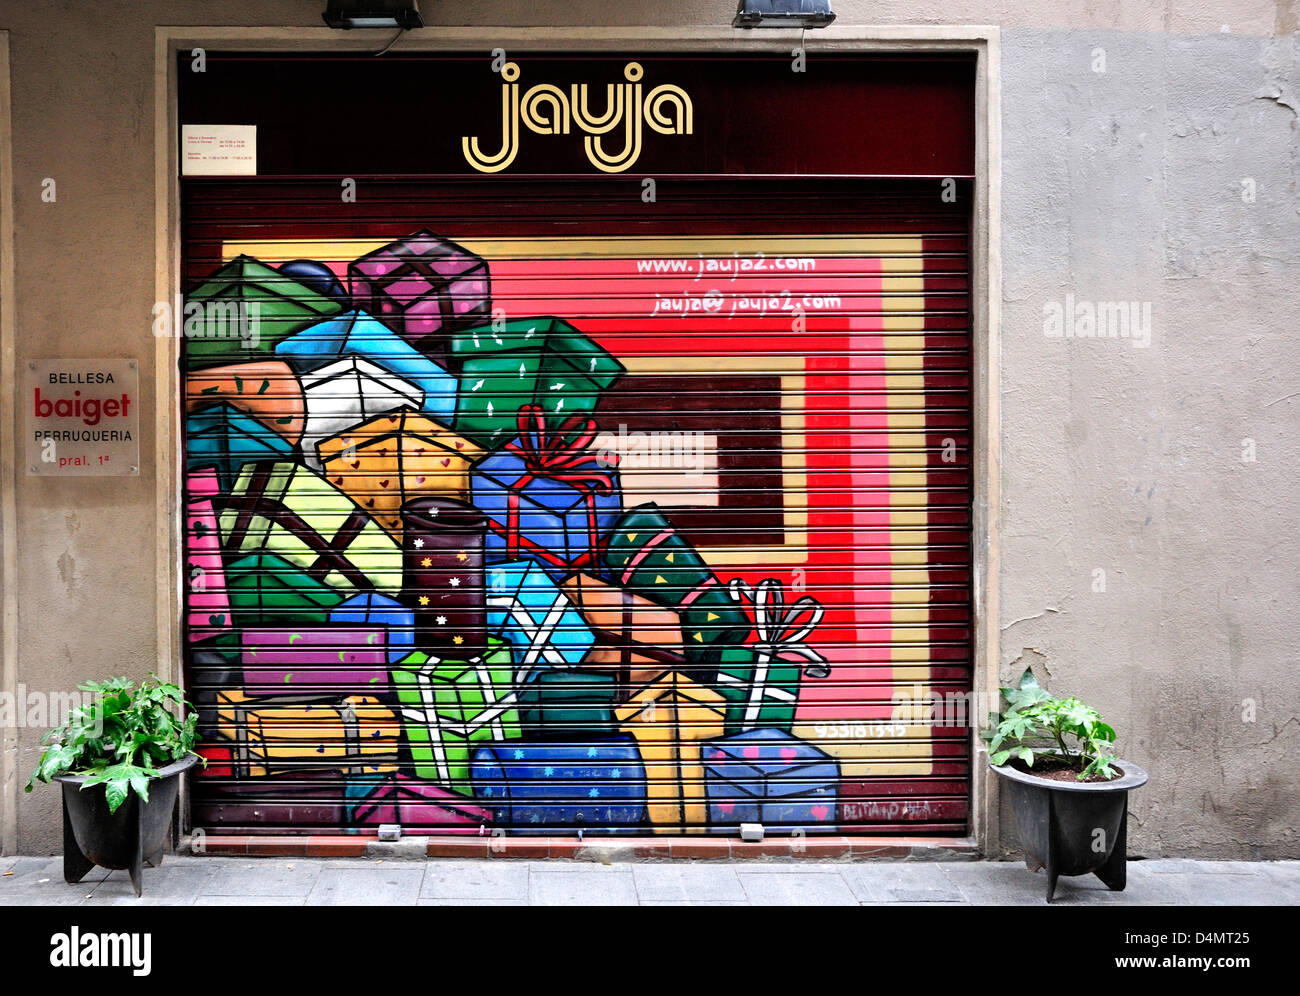 Barcelona, Catalonia, Spain. Painted shop shutters reflecting the business. Jauja gift shop in Carrer de Santa Anna Stock Photo